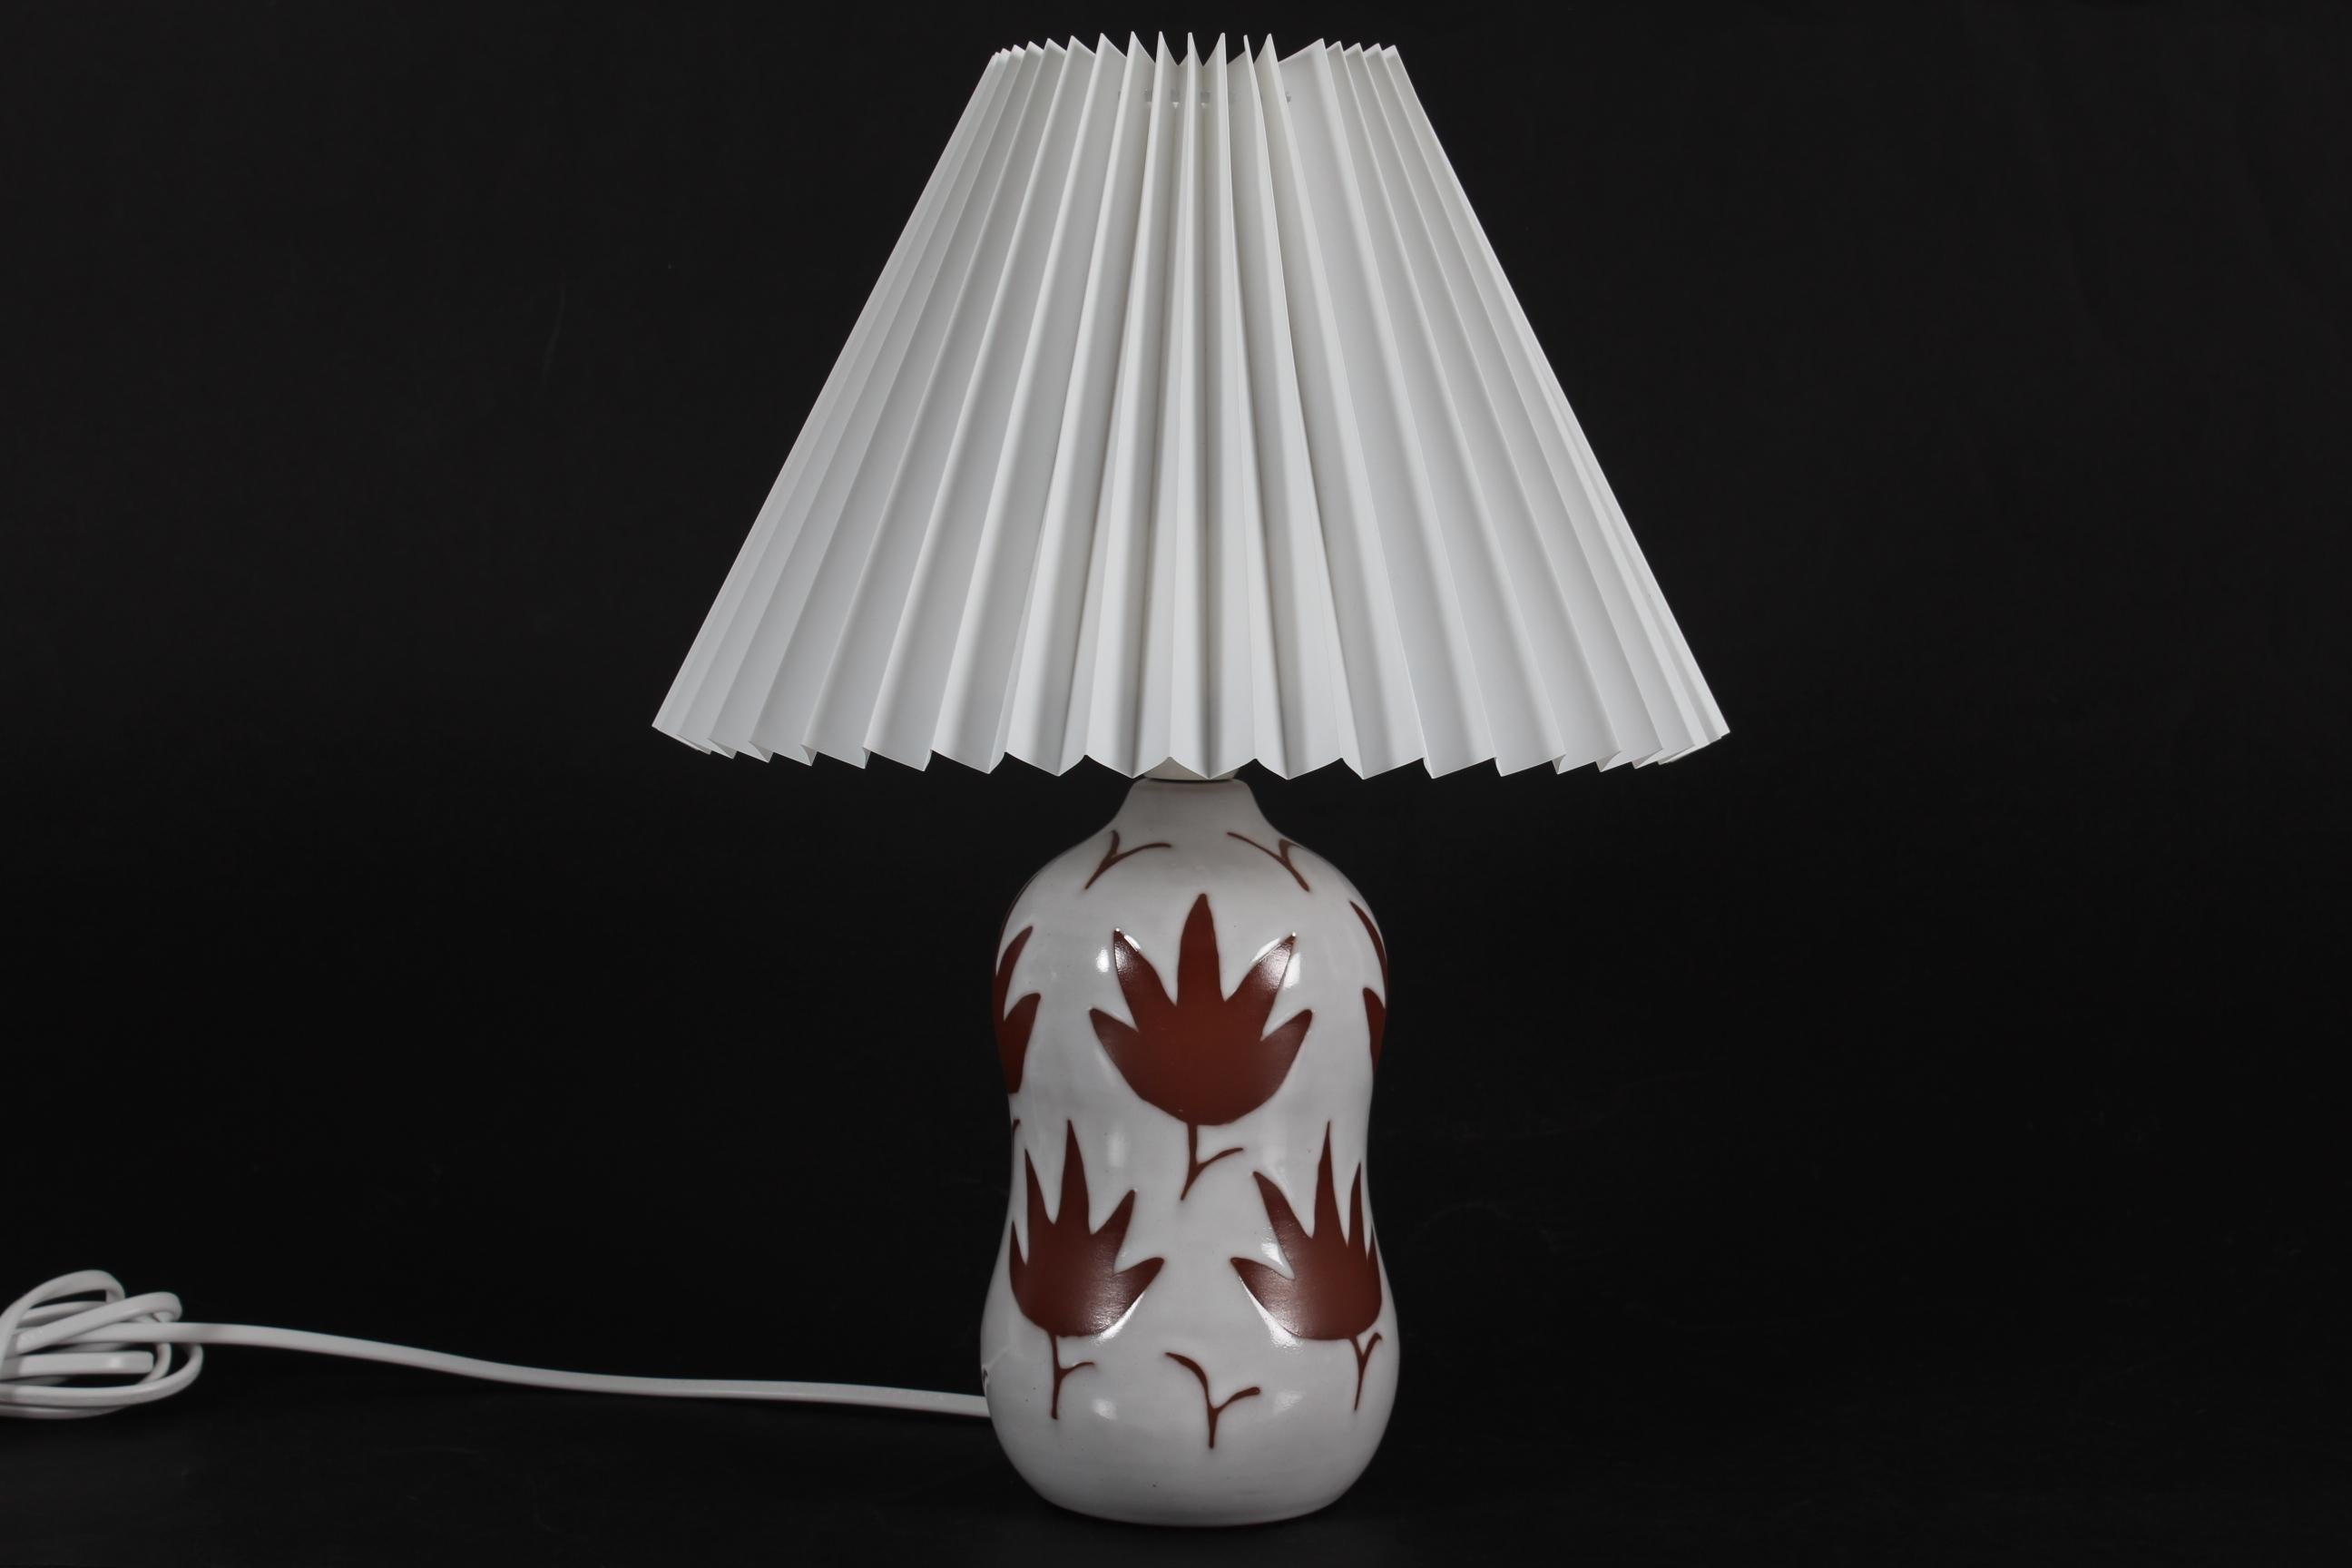 Danish table lamp made designed and made in the 1950s

The ceramic lamp base has a leaf pattern that emerges in the contrast between a unglased part and a part with white glaze. 

Included is a new clip on pleated lampshade designed and made in